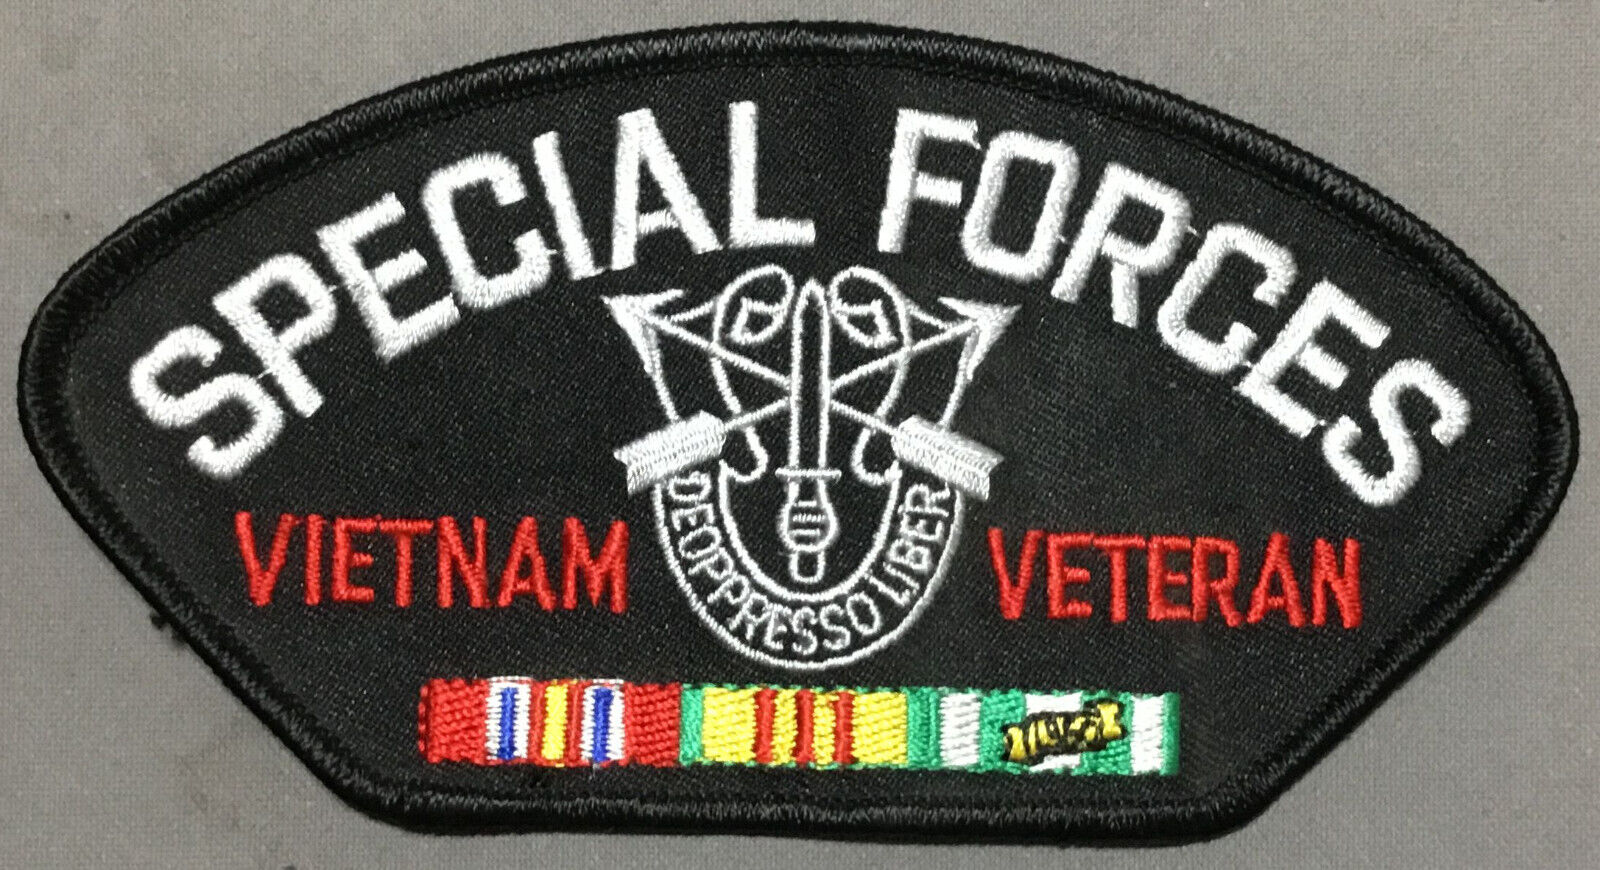 SPECIAL FORCES Vietnam Veteran       SPECIAL PURCHASE    SHOWROOM CLEARANCE SALE